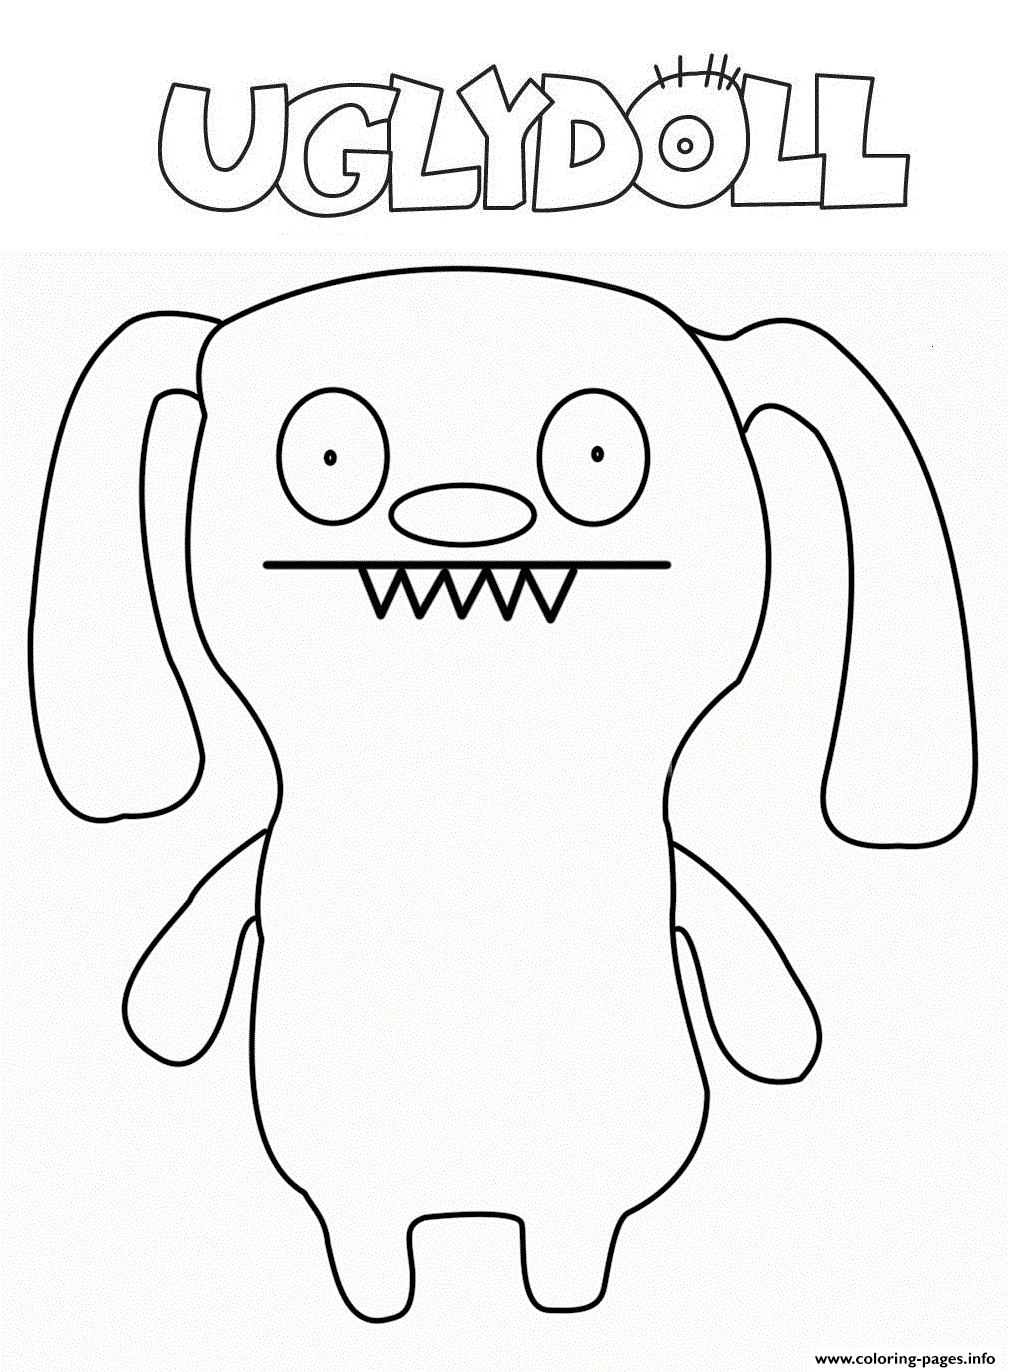 Ugly Fish Coloring Pages Coloring Pages